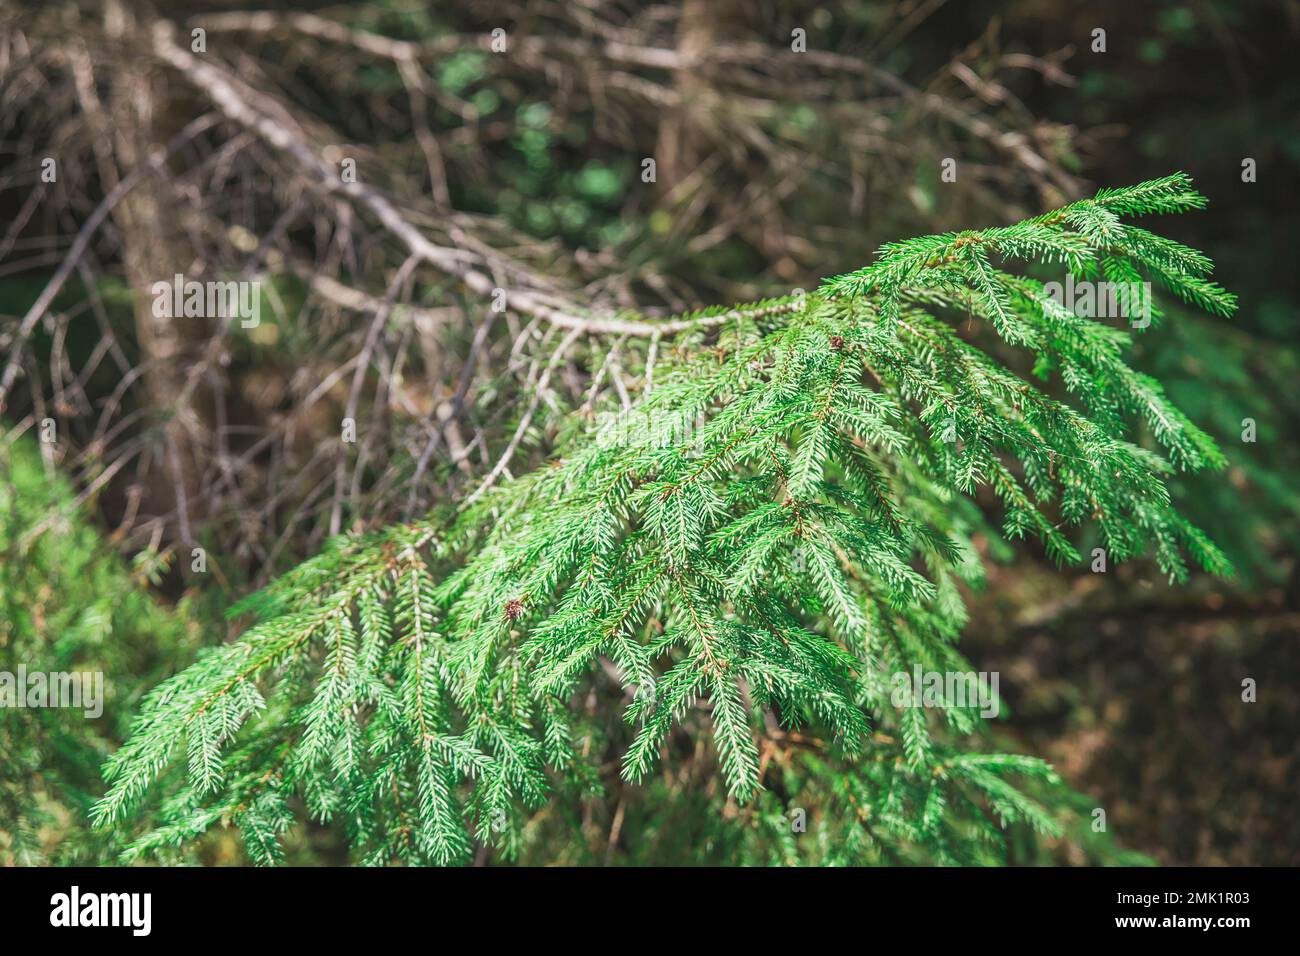 alive conifer branch on a dry lifeless tree Stock Photo